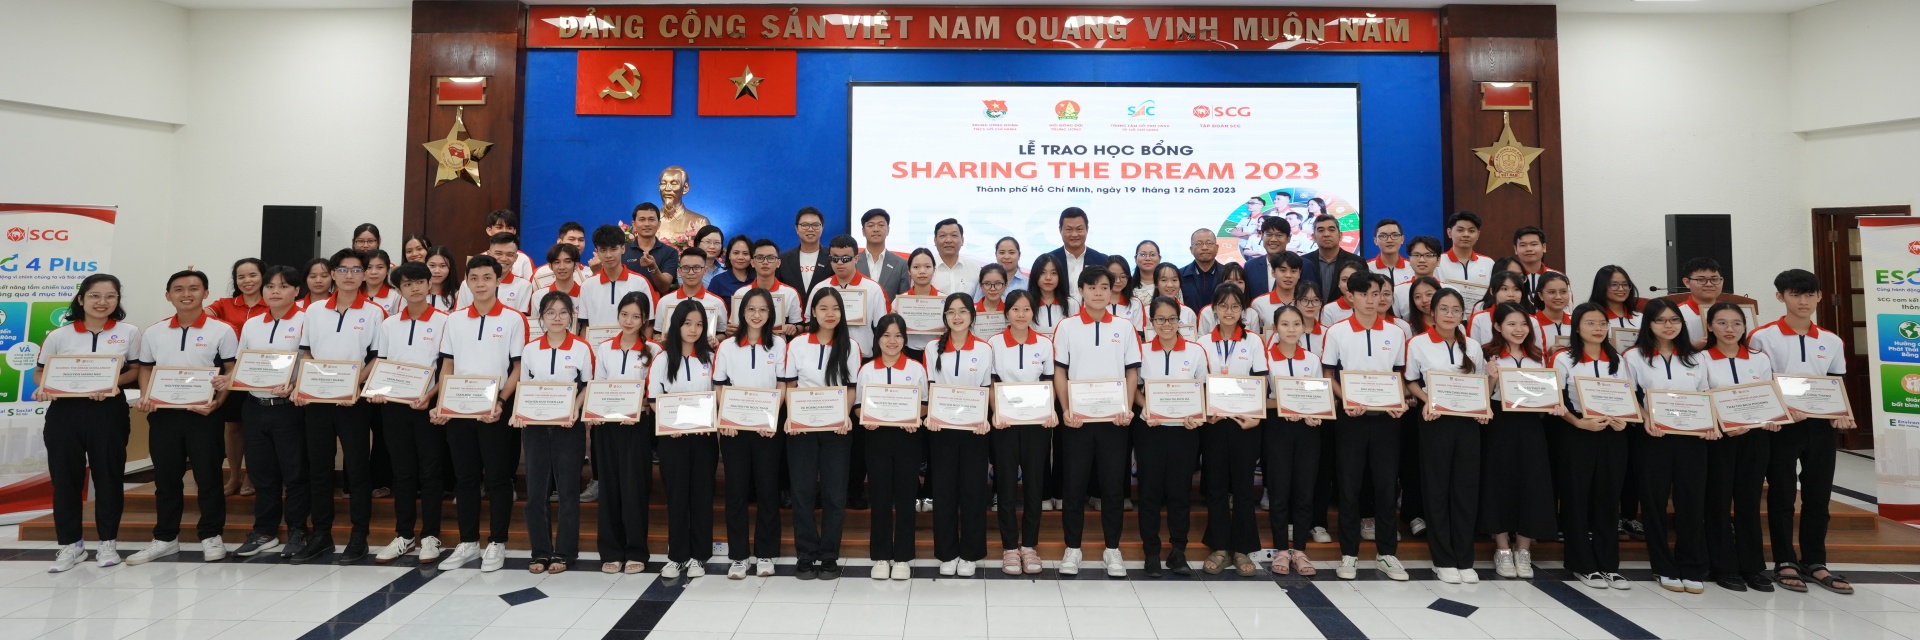 SCG Sharing The Dream Scholarships awarded to 200 students